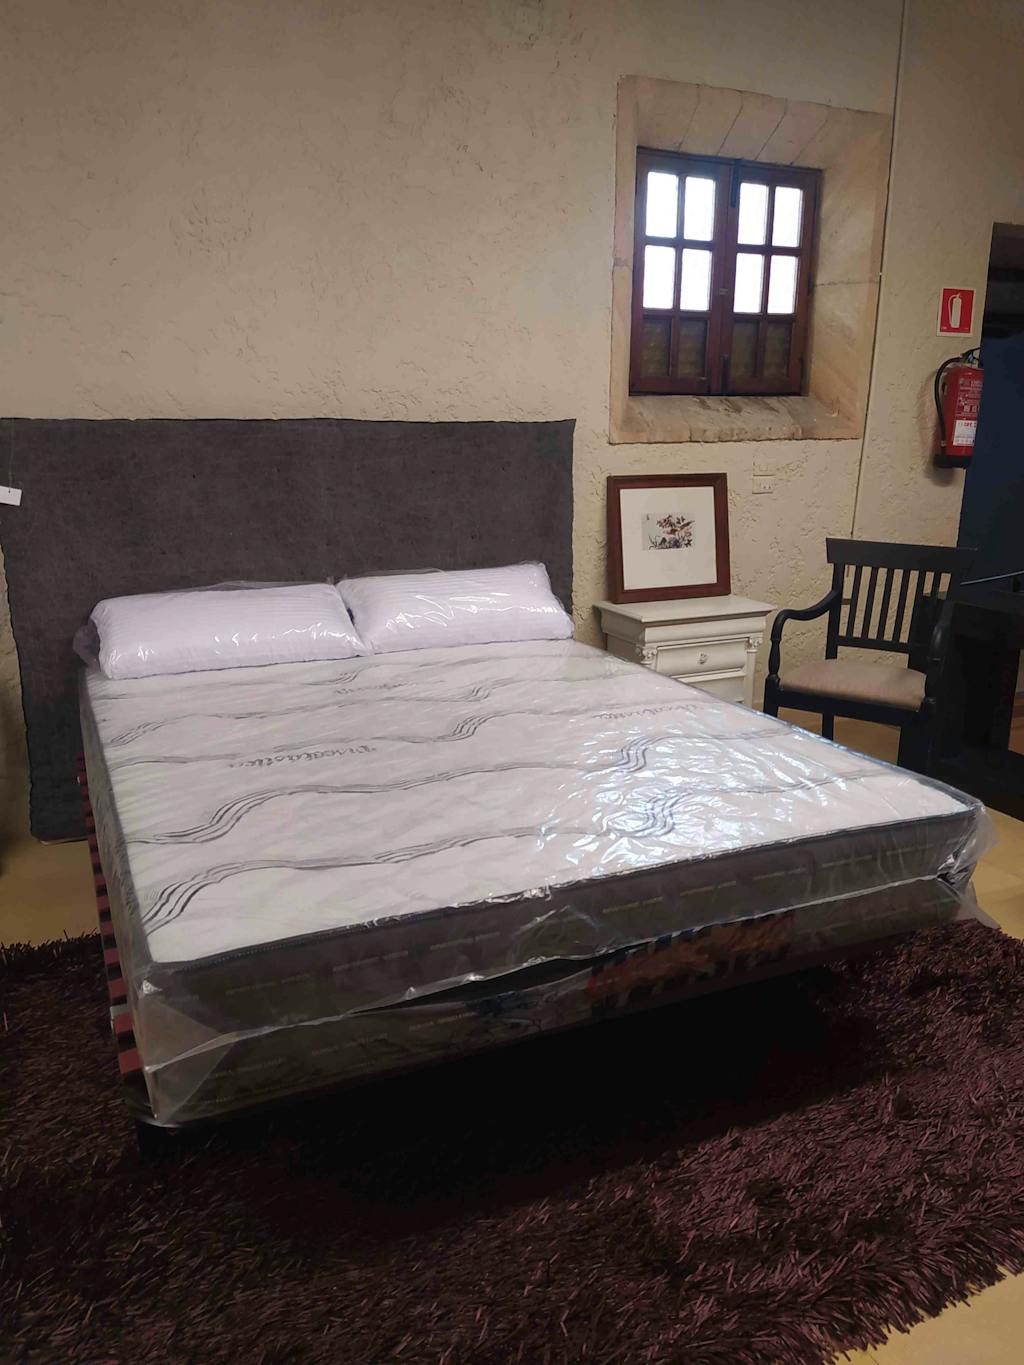 Viscoelastic mattress for double bed.